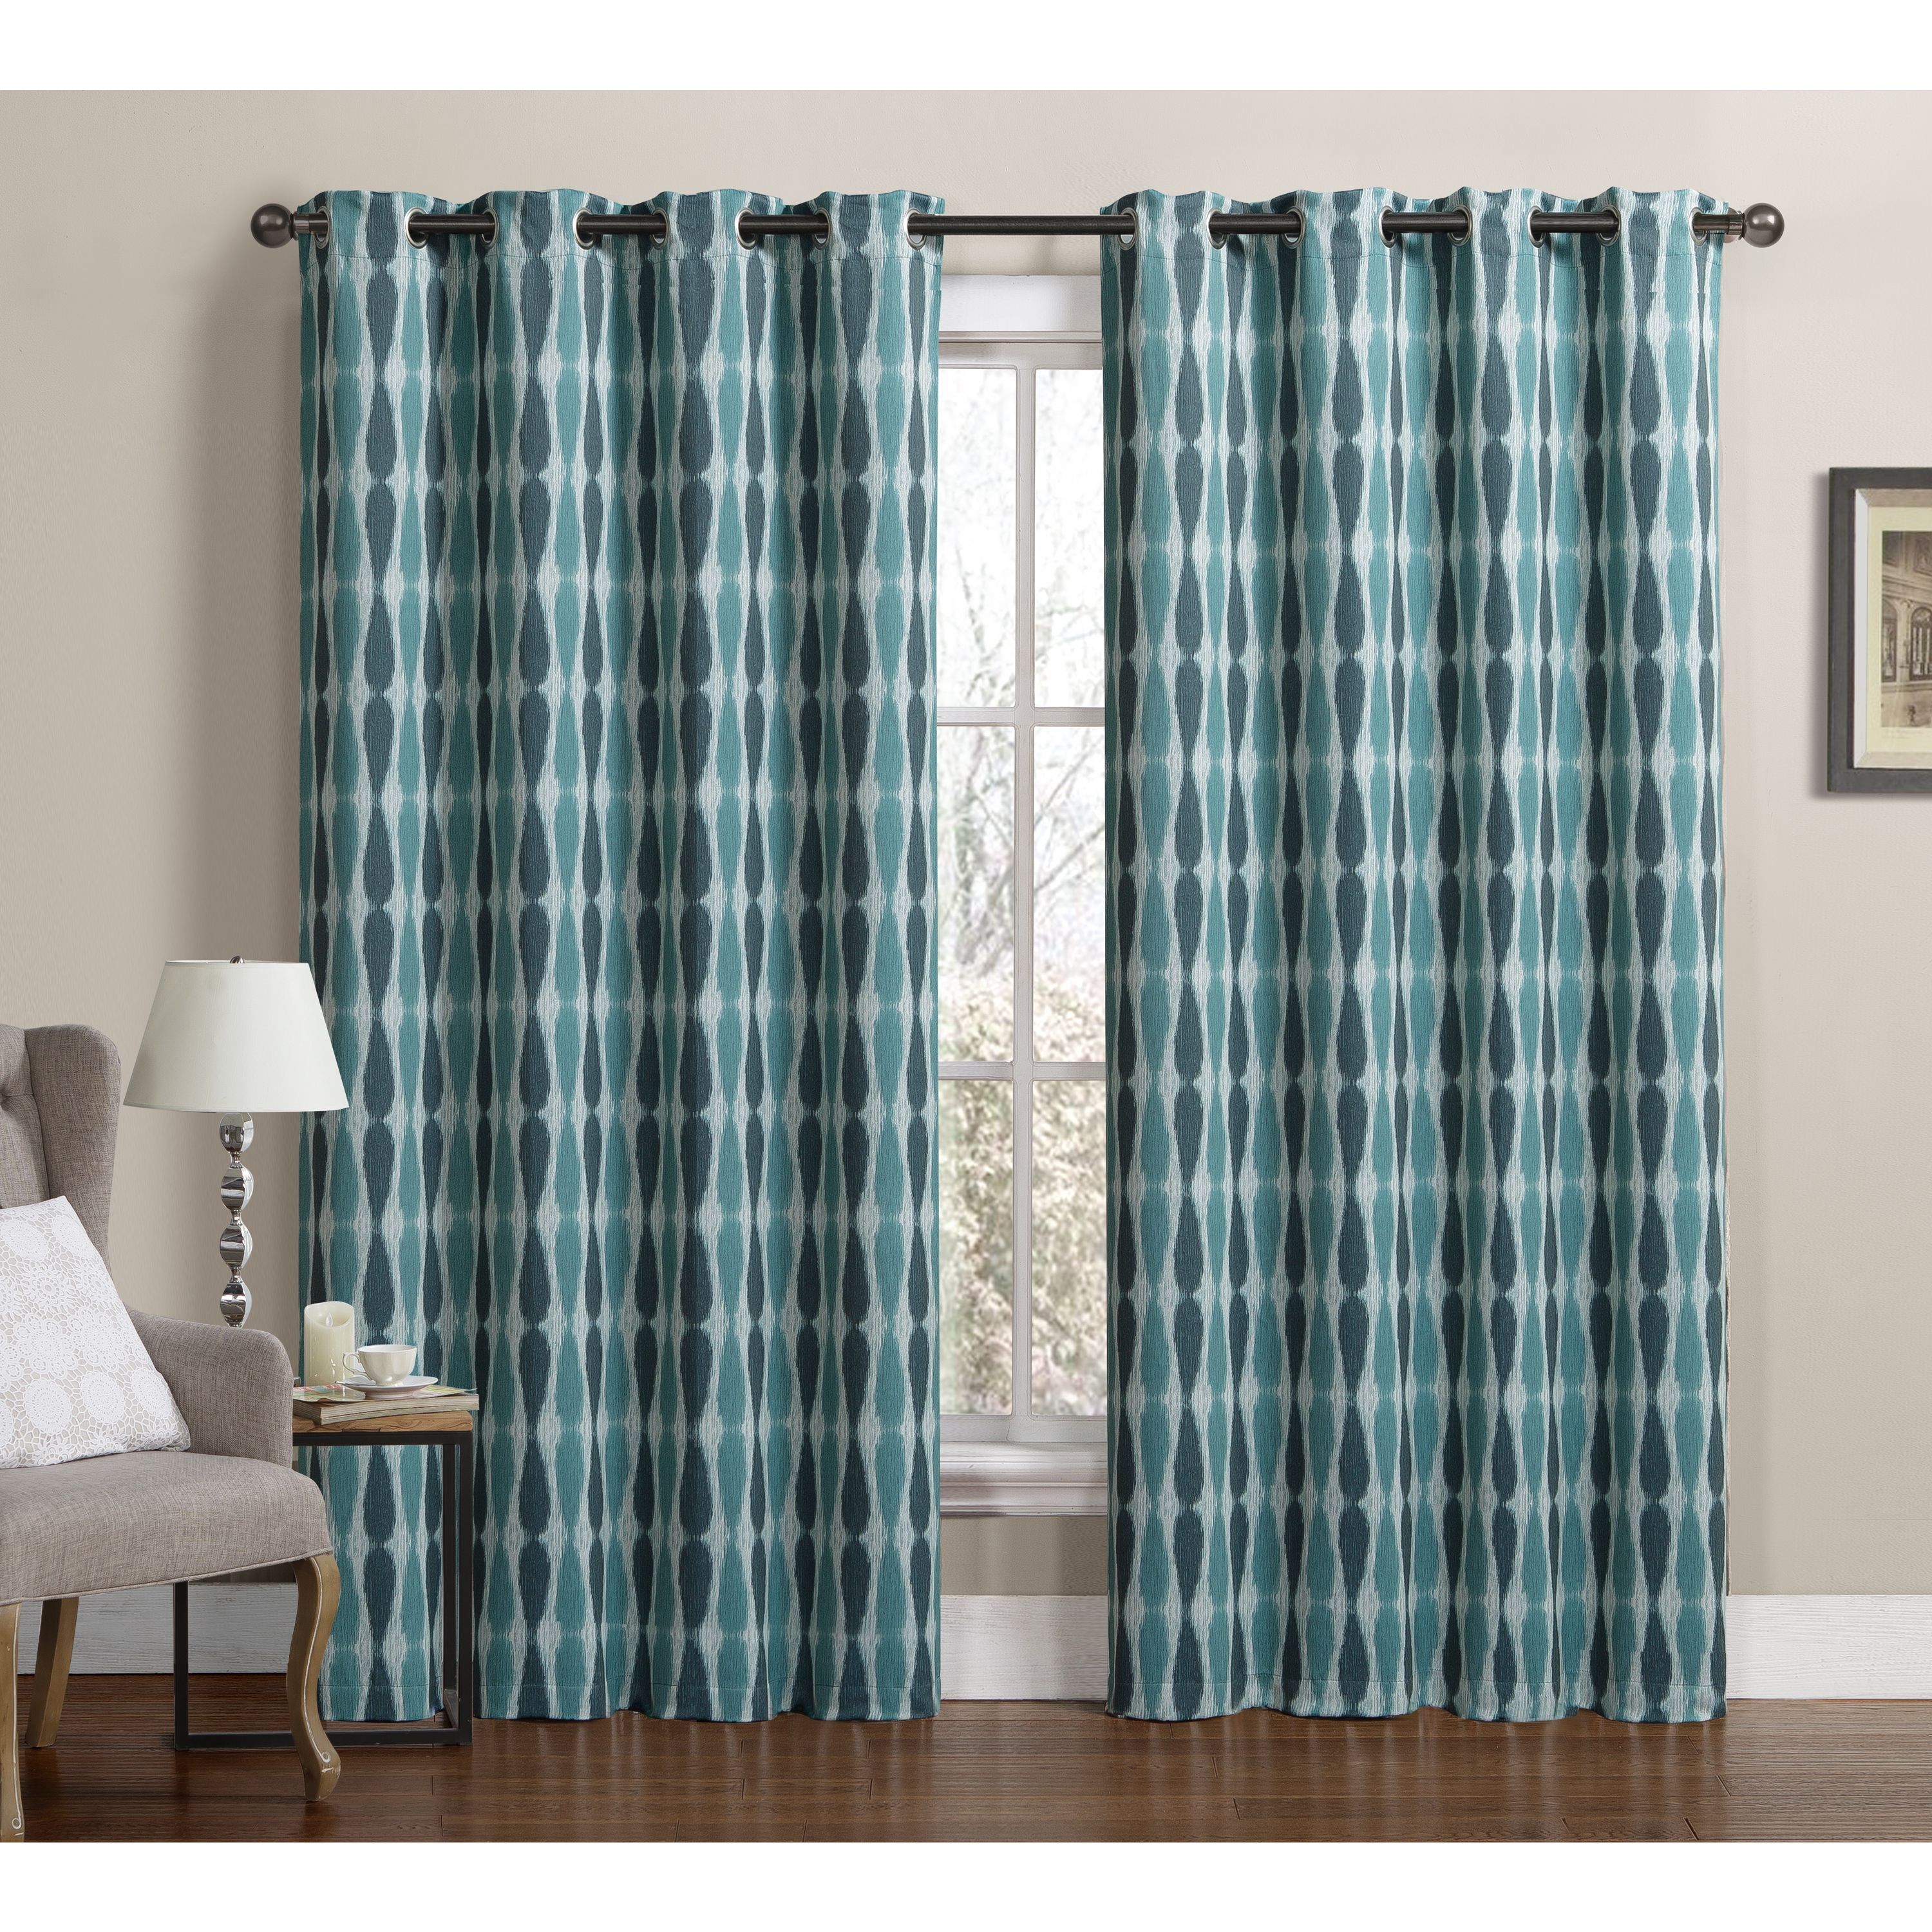 Vcny Monsoon Grommet Top Blackout Curtain Panel Pair Vcny Throughout Monsoon Curtains (View 4 of 15)